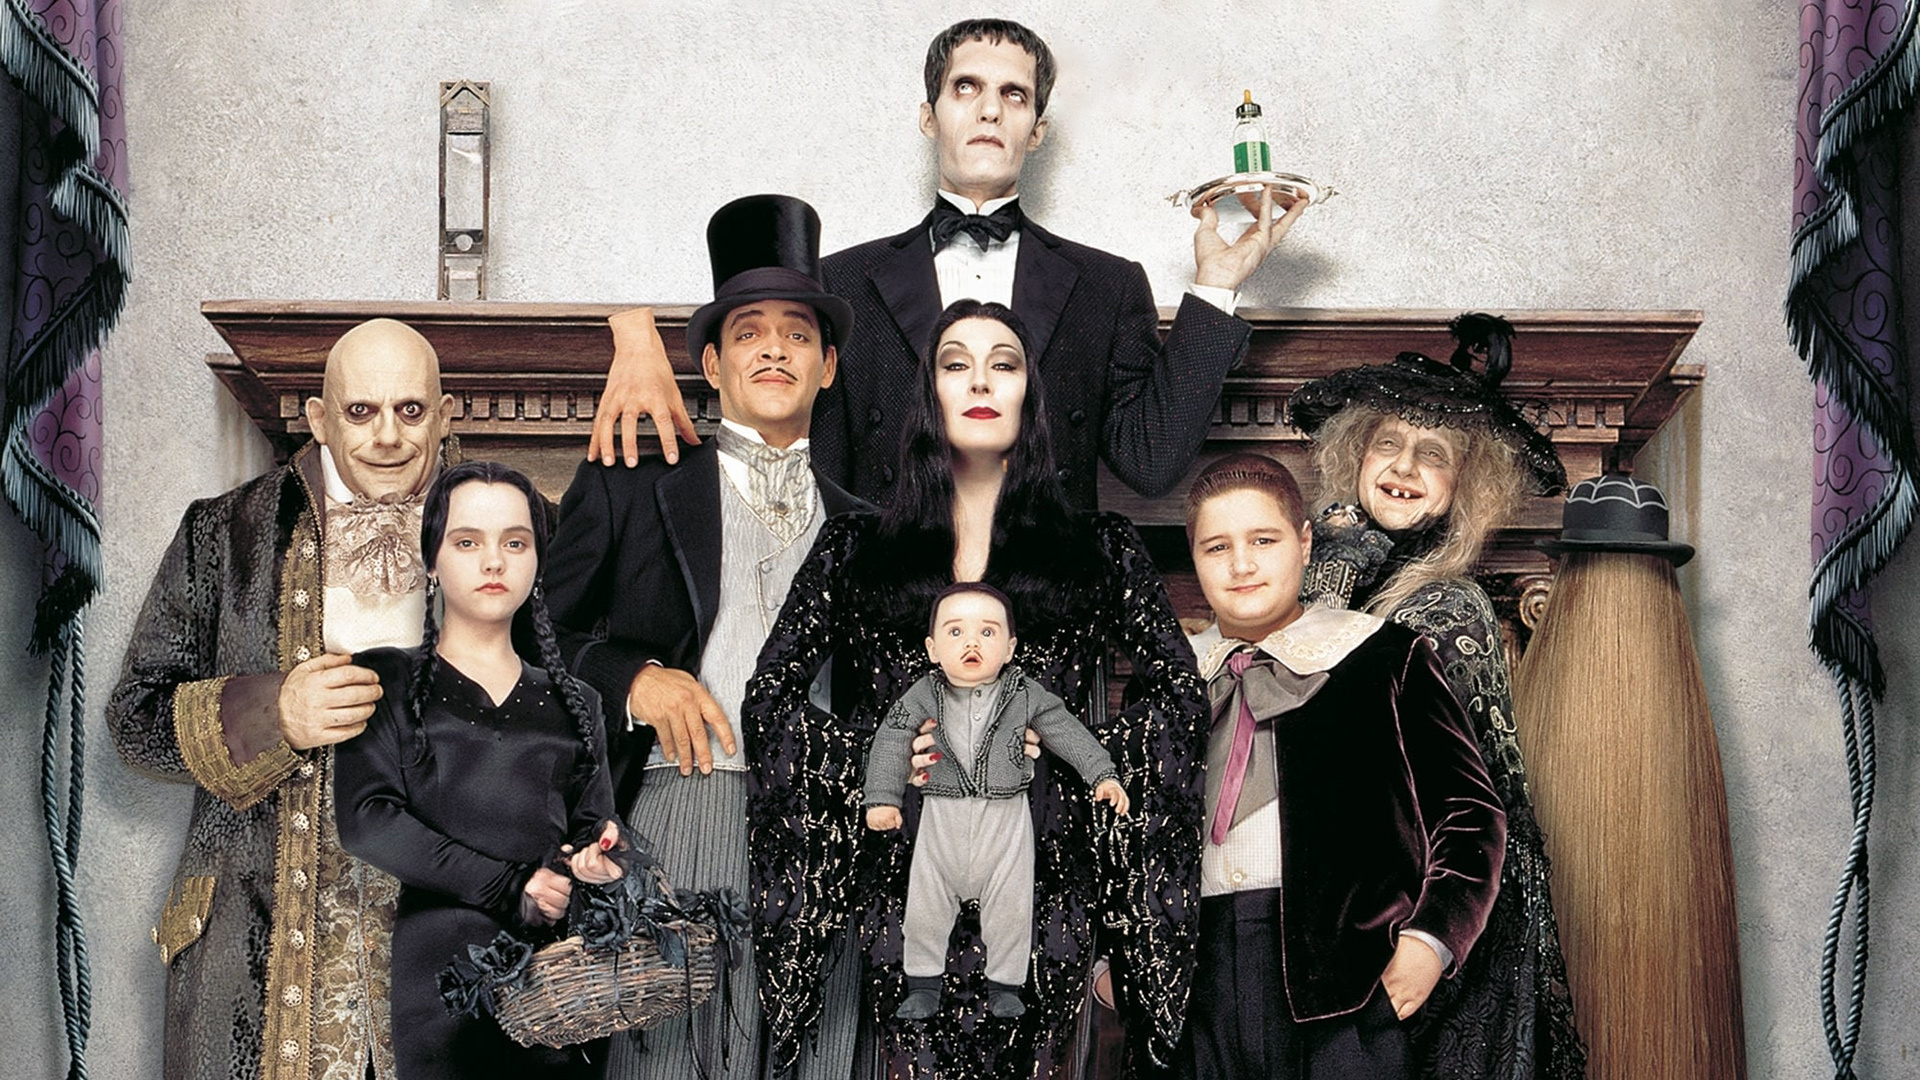 The Addams Family Values, Movie fanart, Dark comedy, Quirky characters, 1920x1080 Full HD Desktop